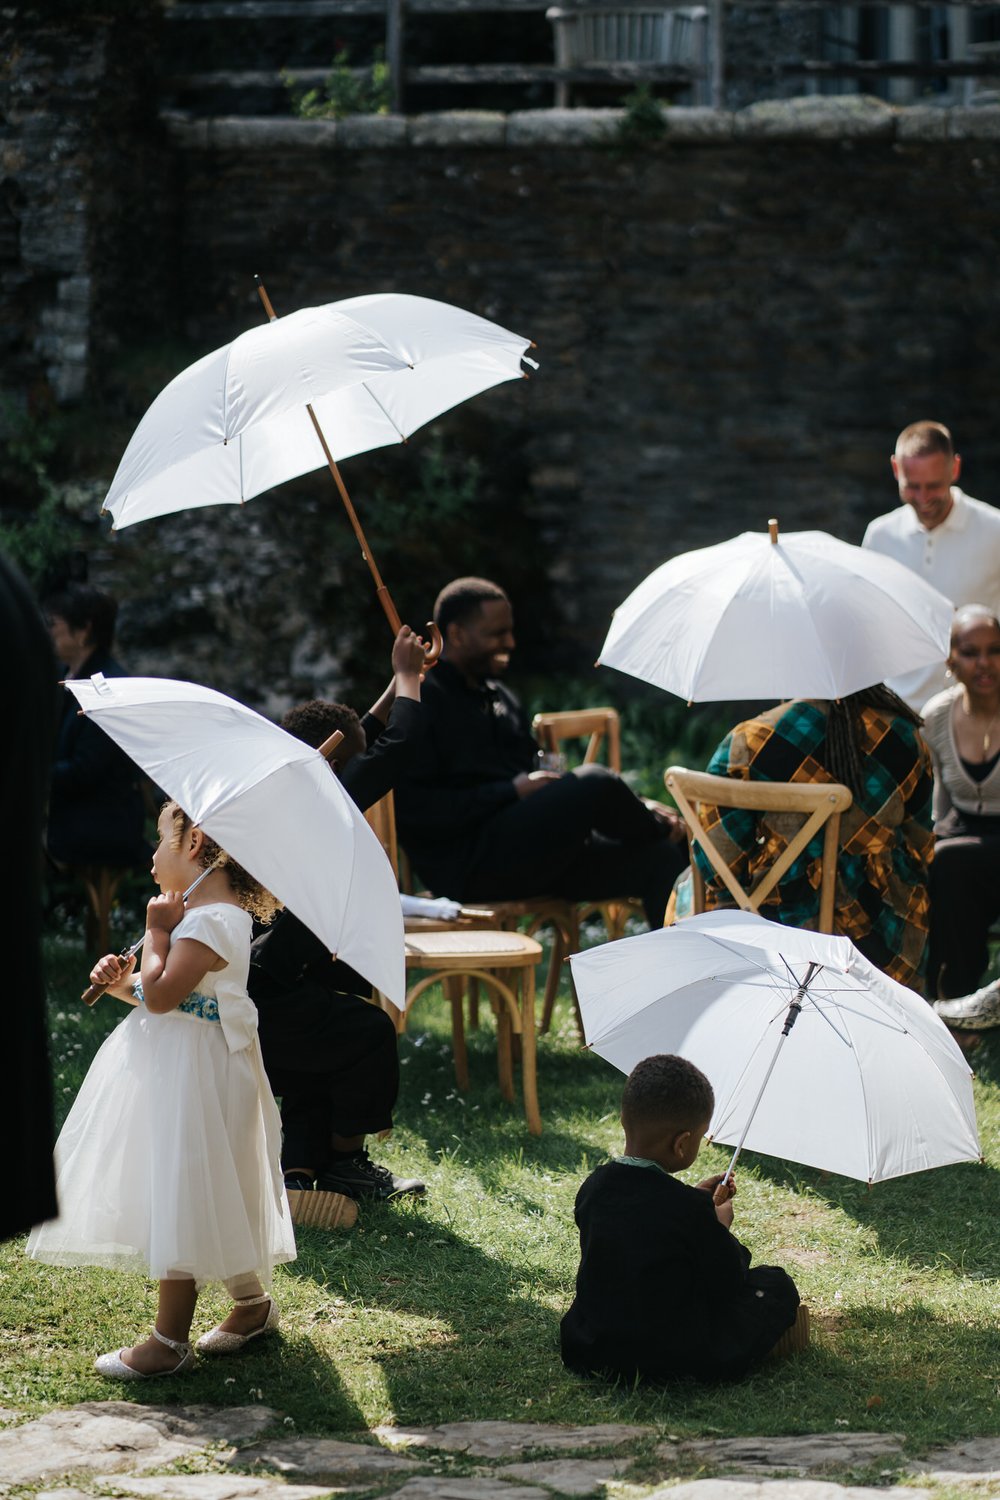 Array of white umbrellas used to shield guests from harsh sunlight create an elegant, accidental display